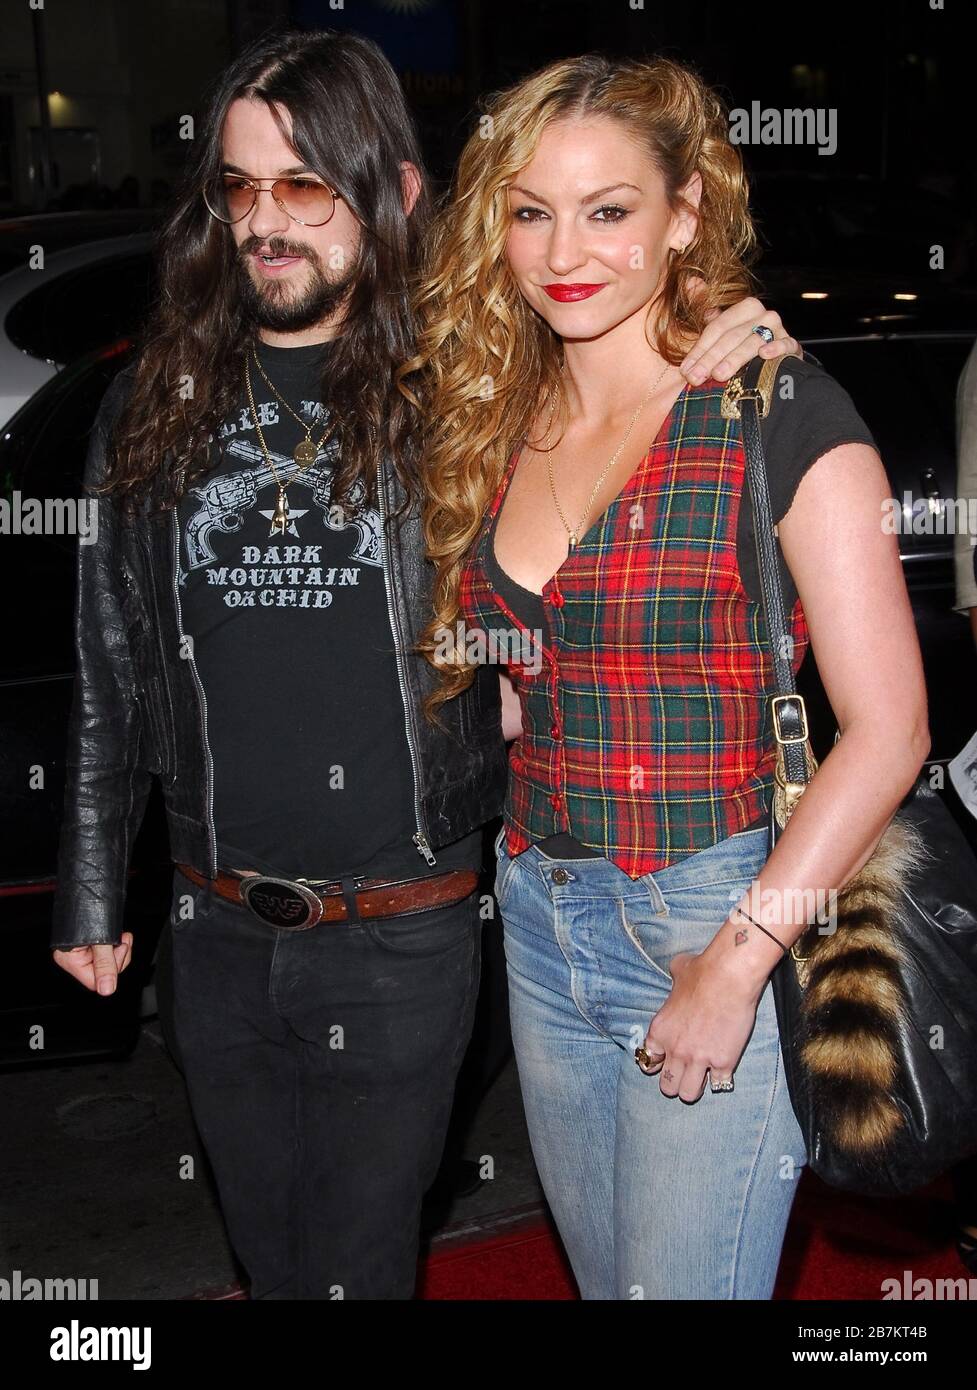 Shooter Jennings and Drea de Matteo at the World Premiere of 'Jackass Number Two' held at the Grauman's Mann Chinese Theater in Hollywood, CA. The event took place on Thursday, September 21, 2006.  Photo by: SBM / PictureLux - File Reference # 33984-6671SBMPLX Stock Photo